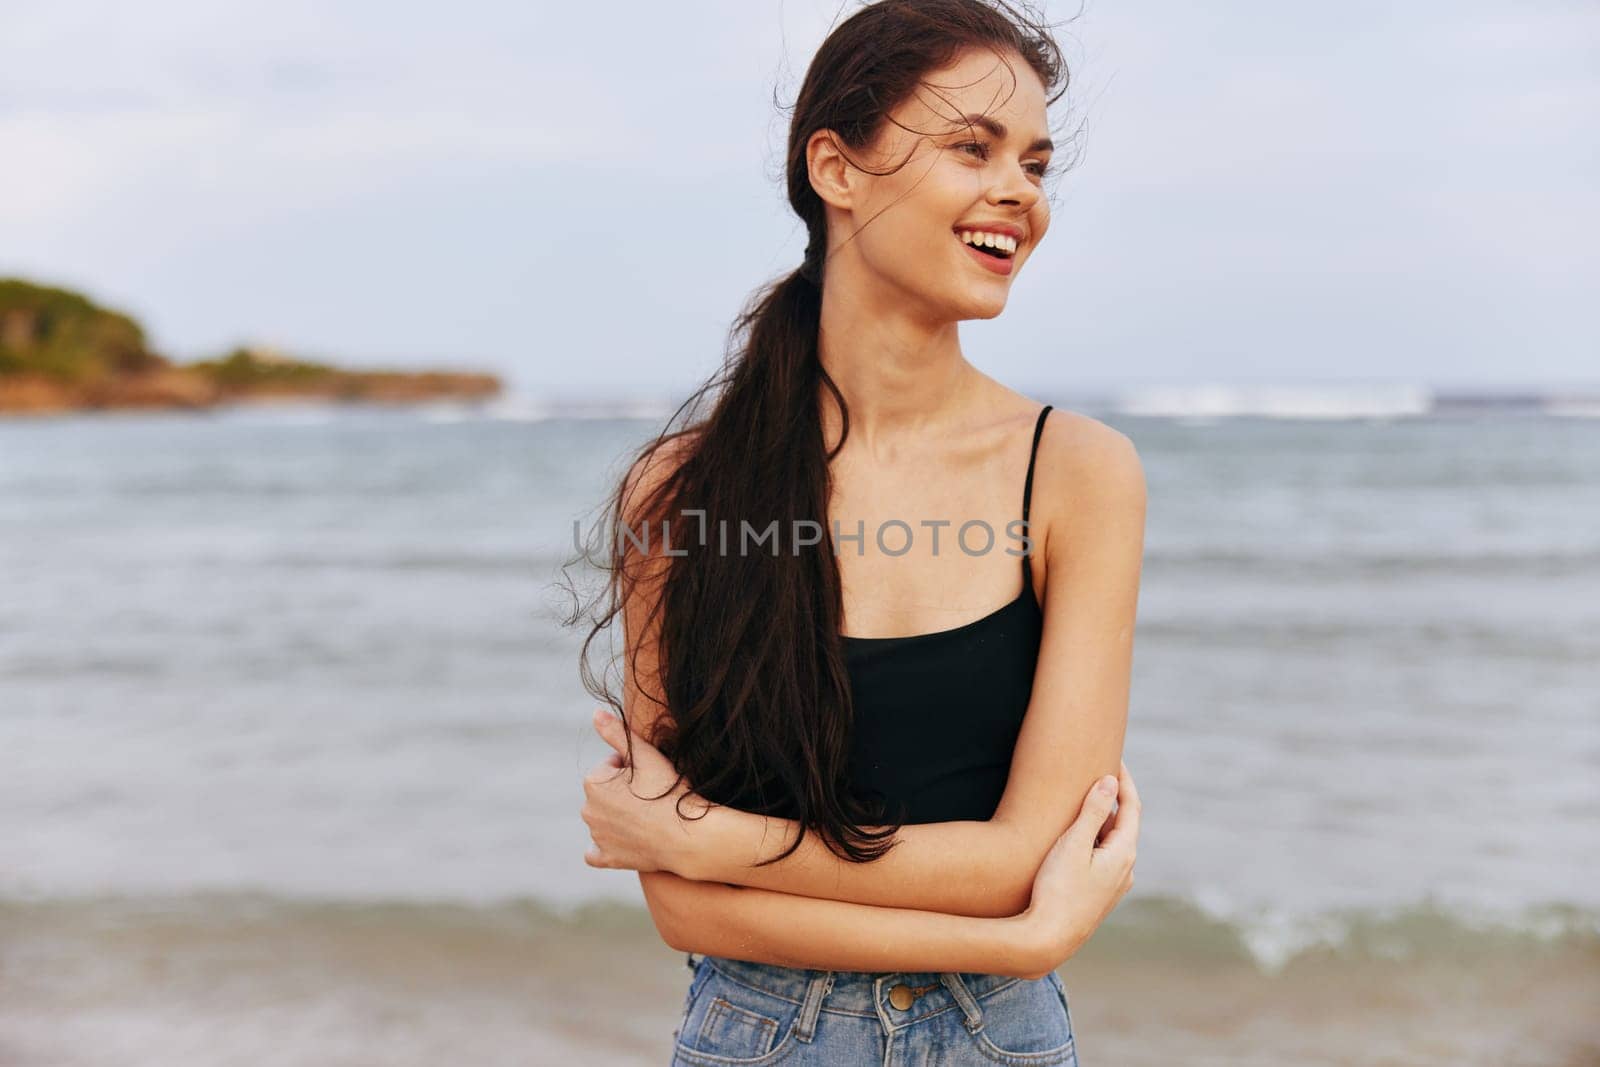 peaceful woman vacation leisure jean summer copy-space caucasian beach sunset lifestyle sand tropical adult smile beautiful travel nature sea smiling ocean